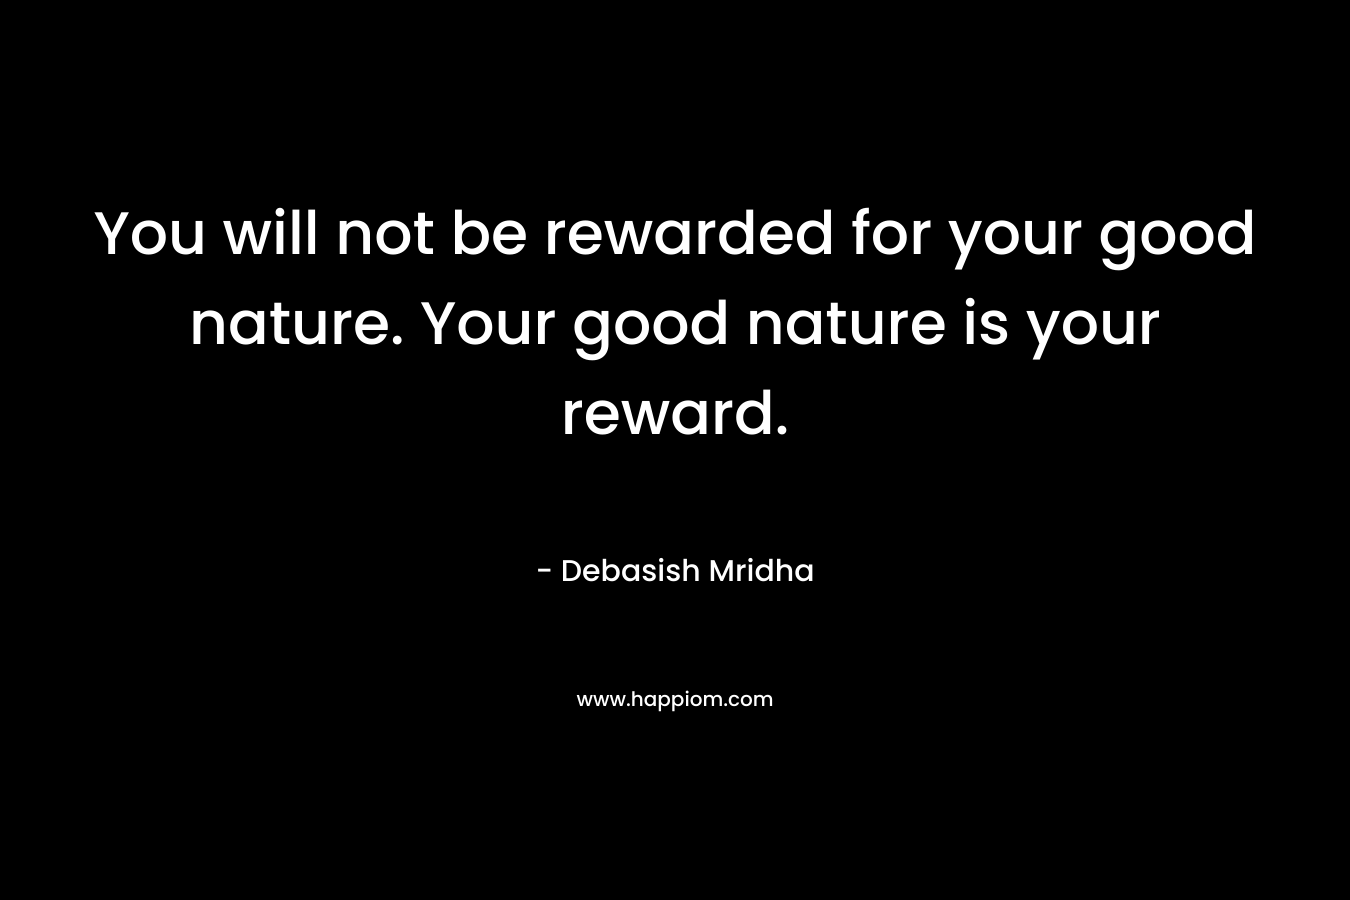 You will not be rewarded for your good nature. Your good nature is your reward.